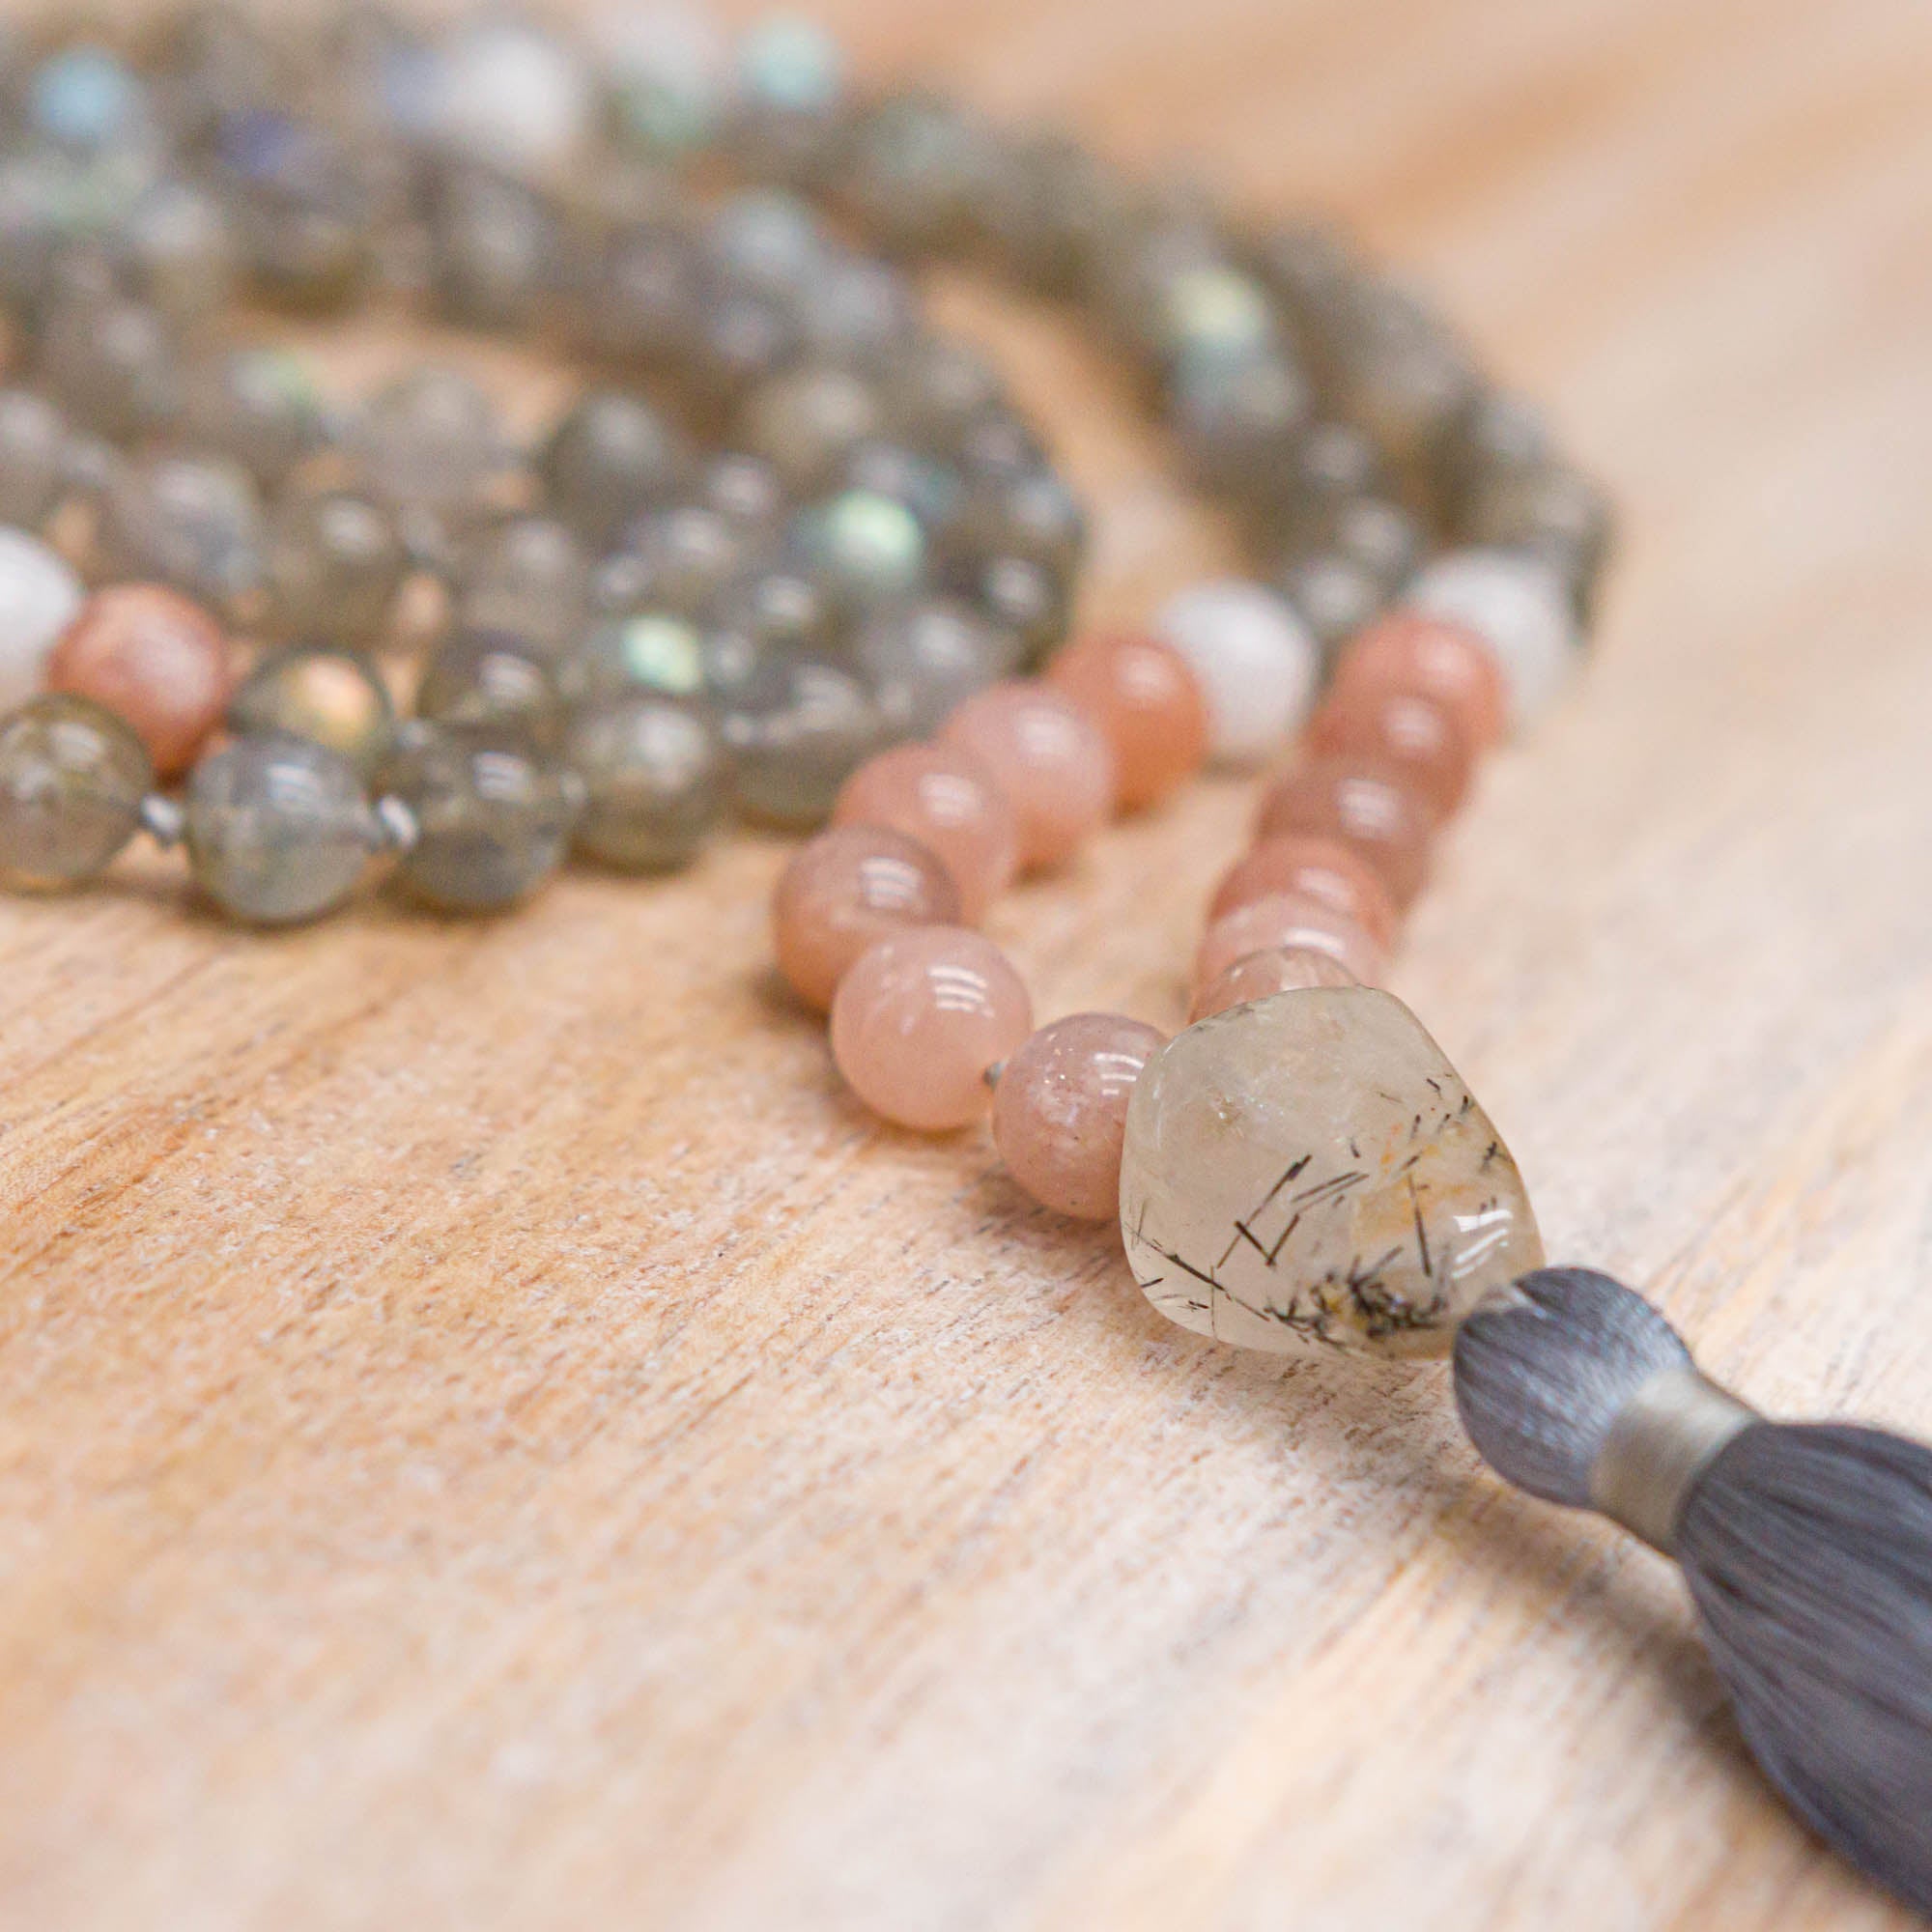 At Calm Buddhi we love our Japa Mala practice. Malas are